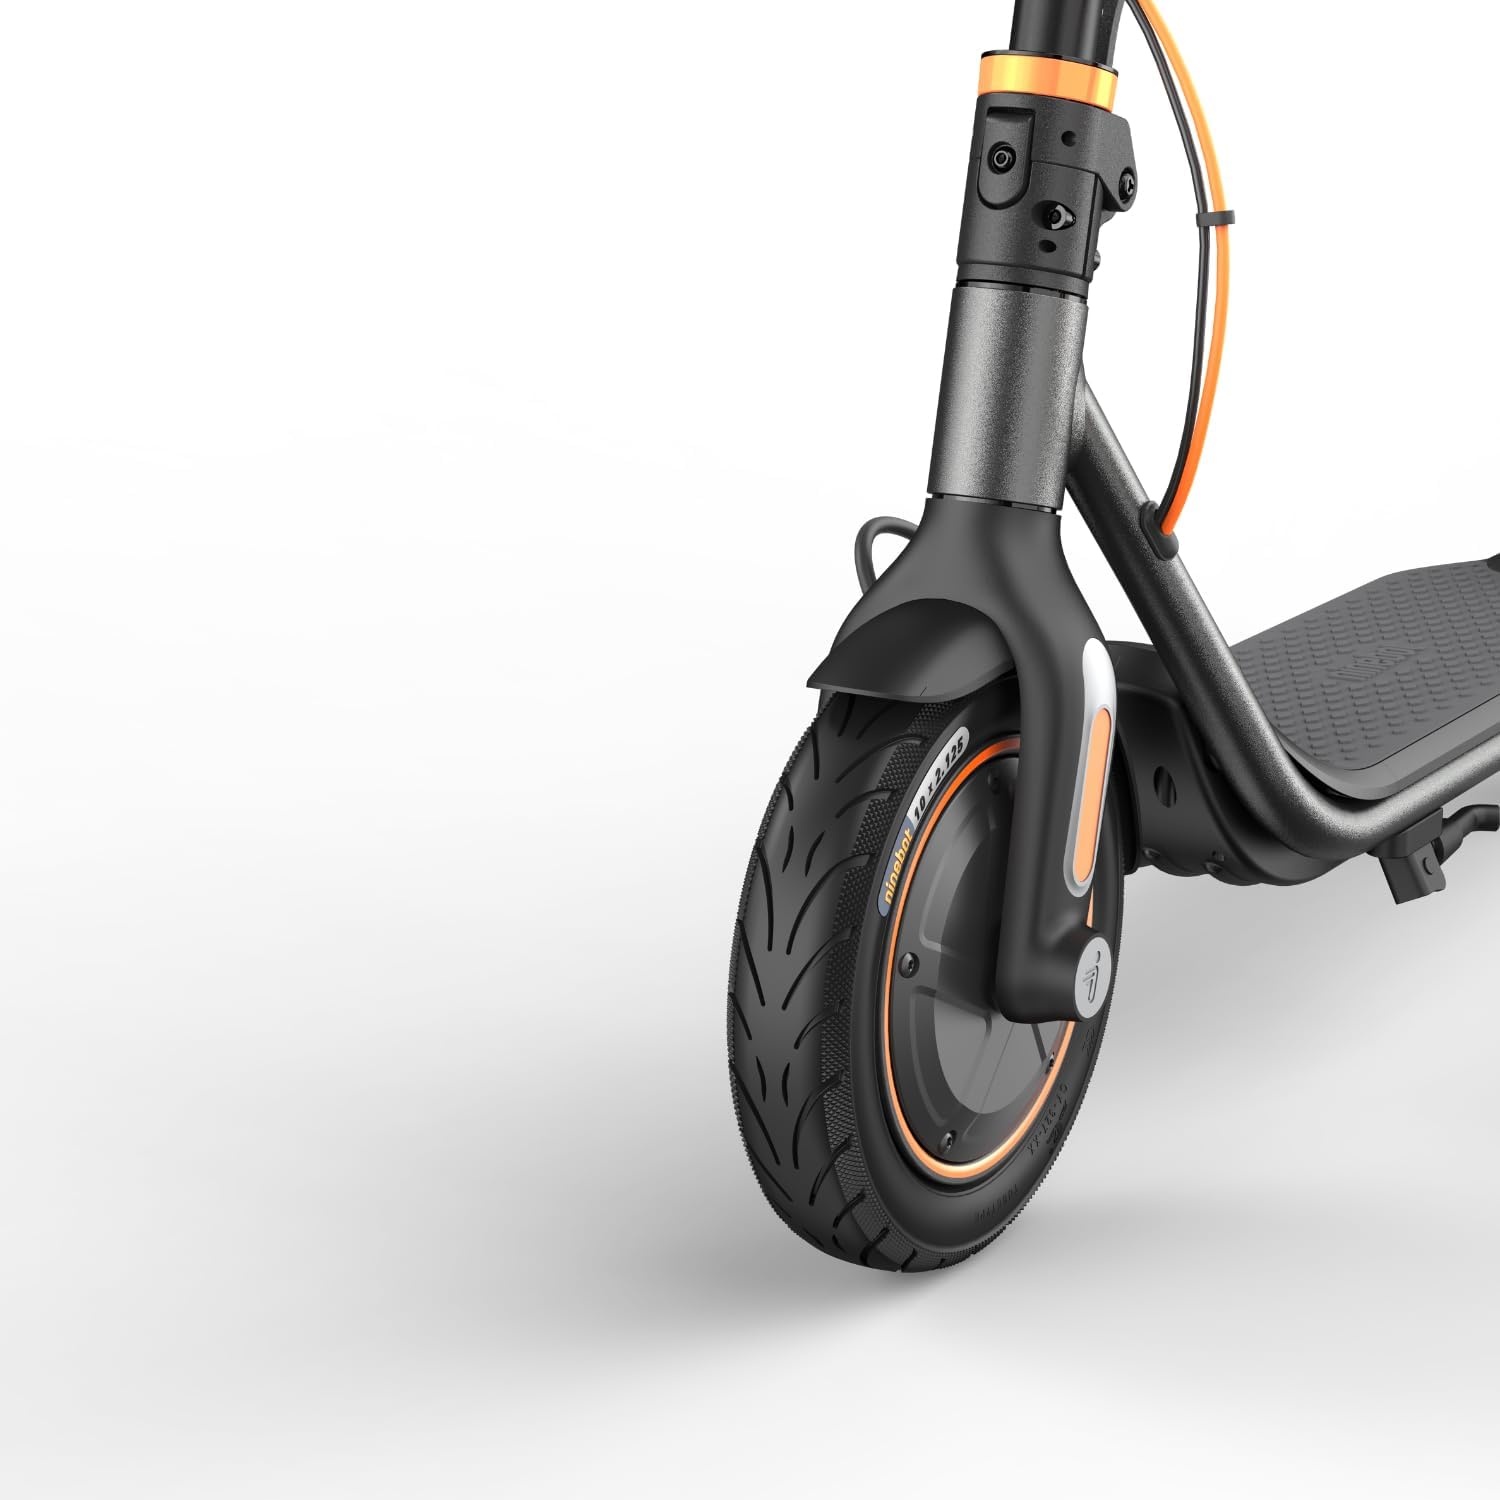 Segway Ninebot F35 Electric Kick Scooter, 350W Motor, 18.6 mph Top Speed, Commuter Scooter for Adults - image 5 of 5